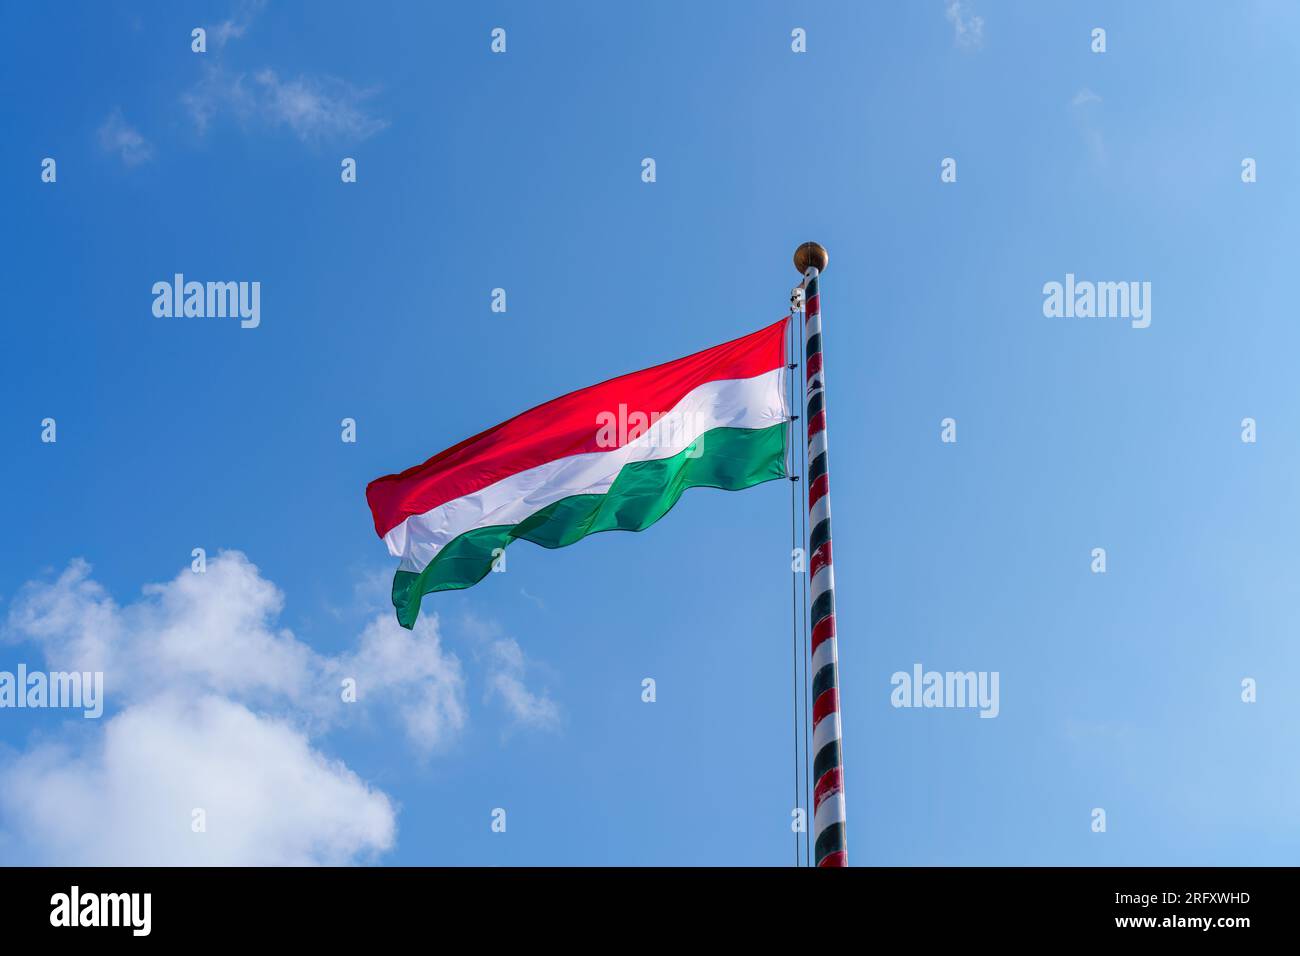 Hungary national flag waving on the wind on blue background. The flag of the Republic of Hungary is flying in the sky. Stock Photo